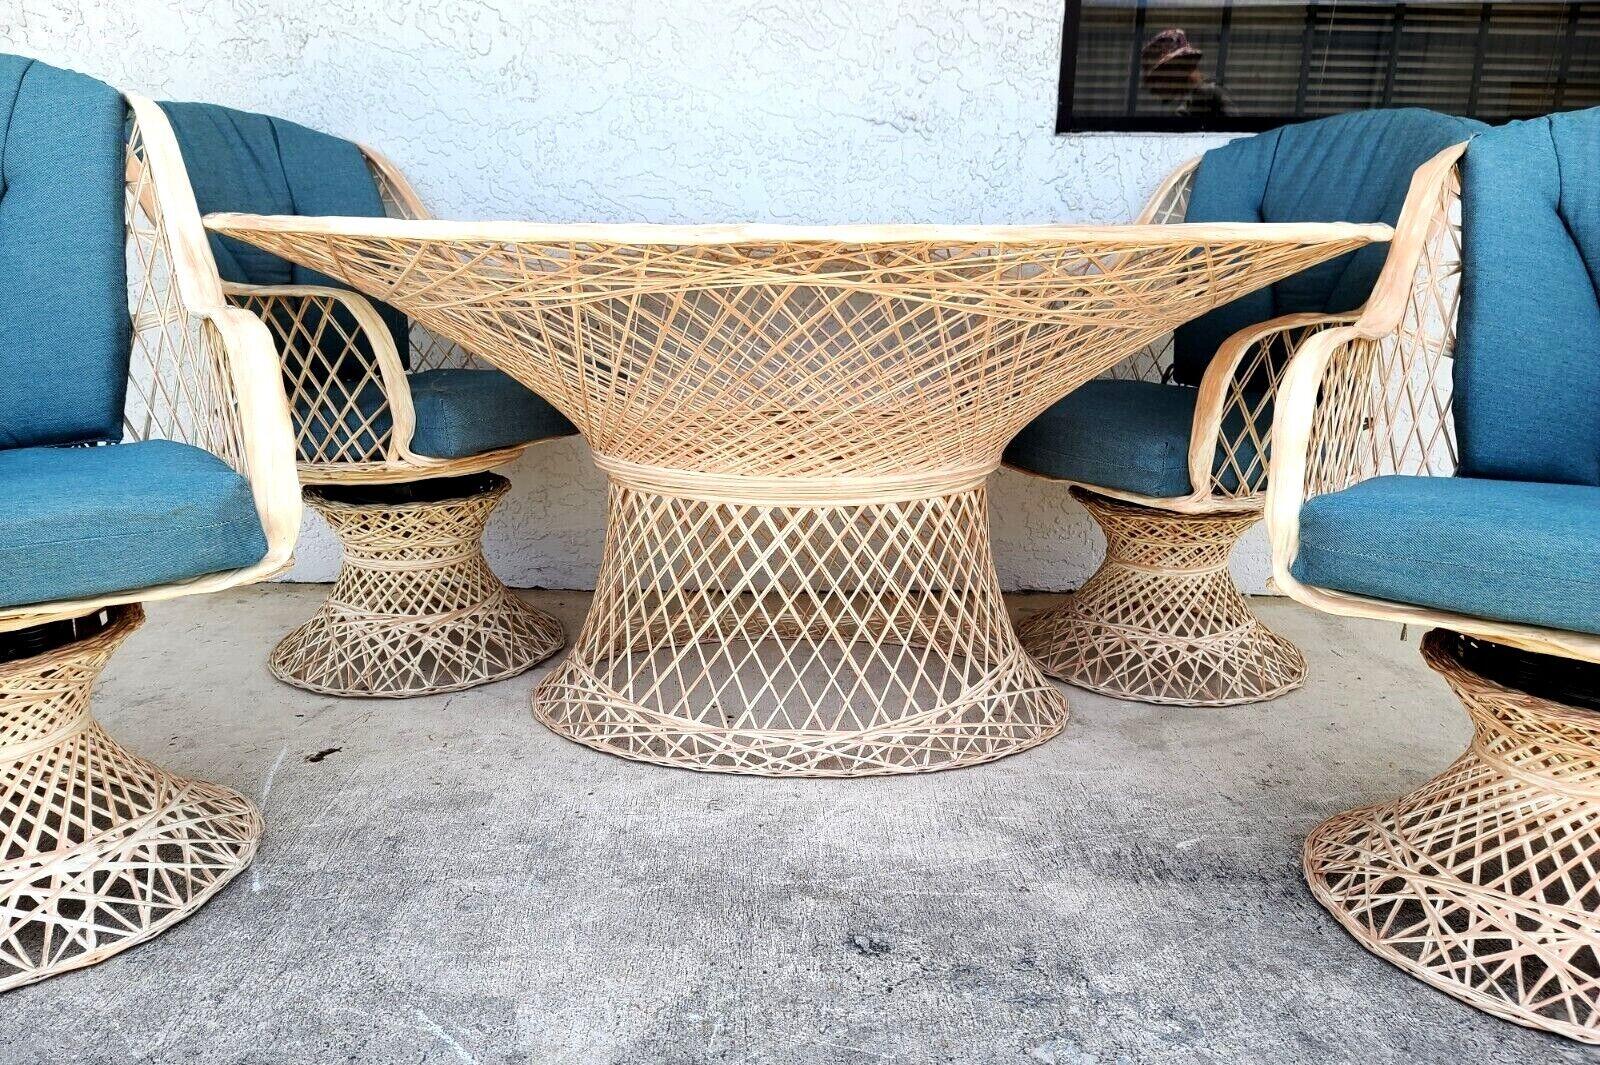 For FULL item description click on CONTINUE READING at the bottom of this page.

Offering One Of Our Recent Palm Beach Estate Fine Furniture Acquisitions Of A

1970s MCM RUSSELL WOODARD Style Spun Fiberglass Outdoor Dining Set
Set includes 4 swivel